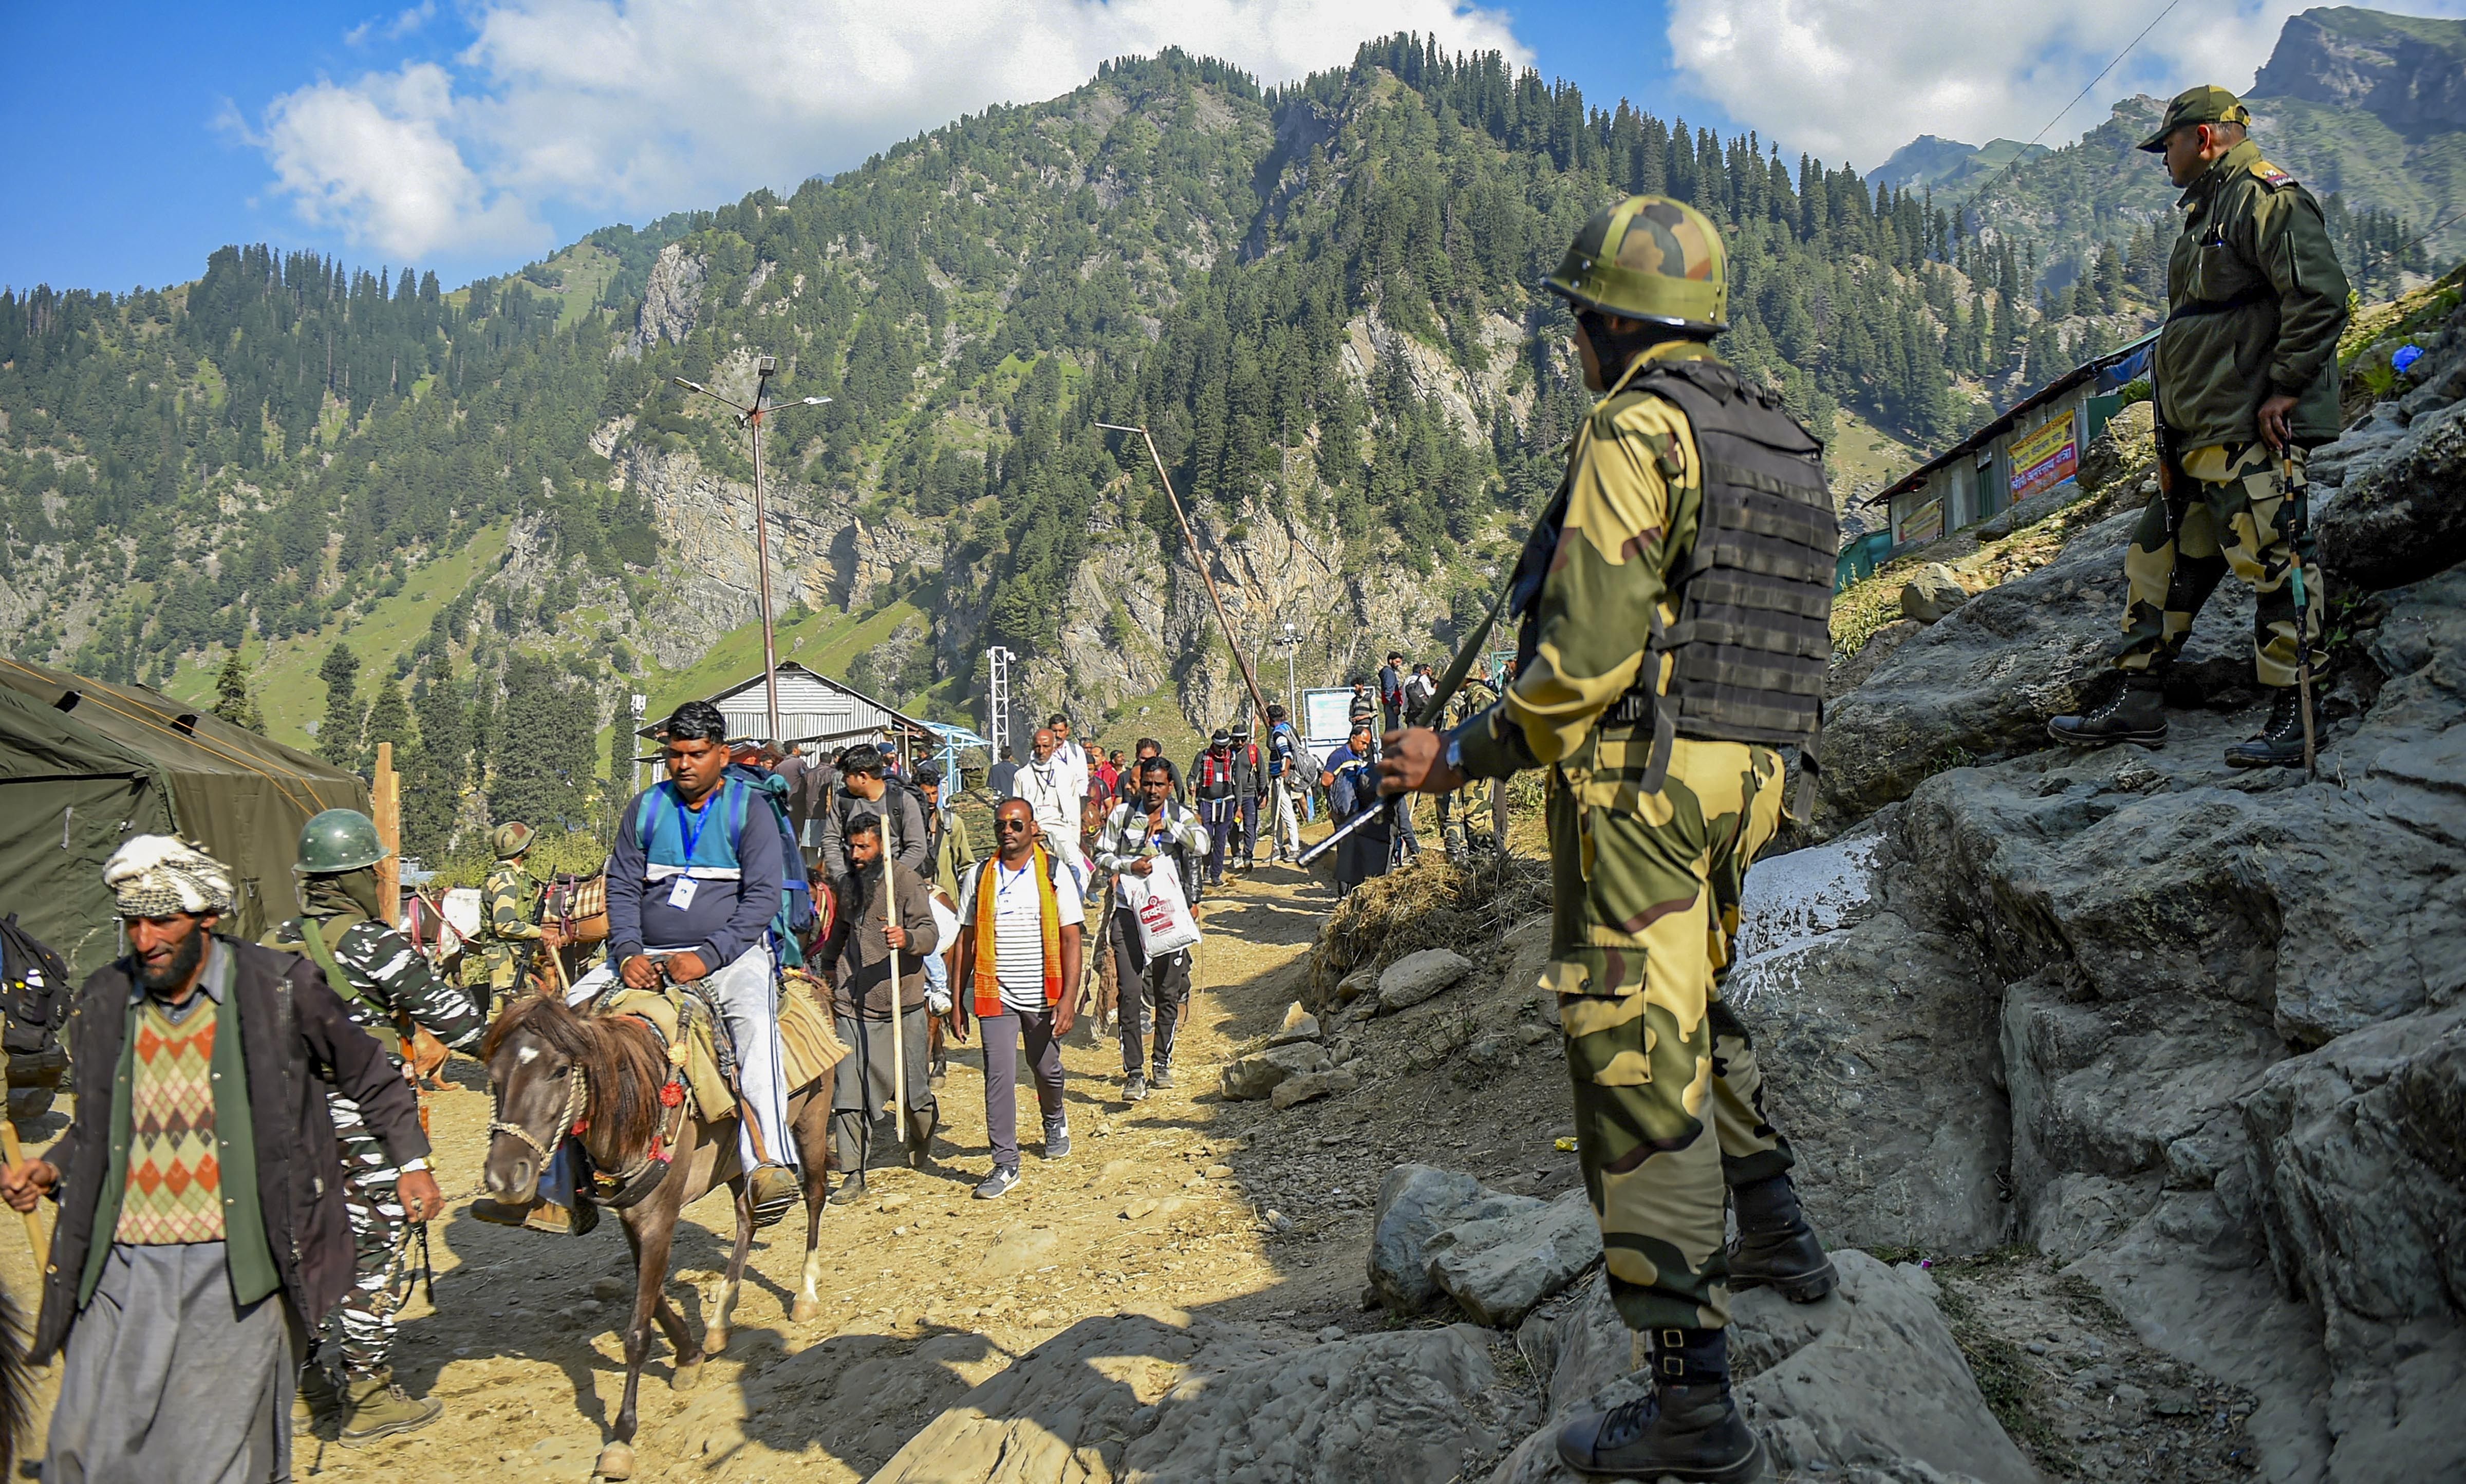 Security personnel stands guard as pilgrims proceed for the cave shrine of Amarnath, at Chandanwari in Anantnag district of south Kashmir, Thursday, June 30, 2022. The 43-day long yatra began Thursday after a gap of over two years due to COVID-19. (PTI Photo